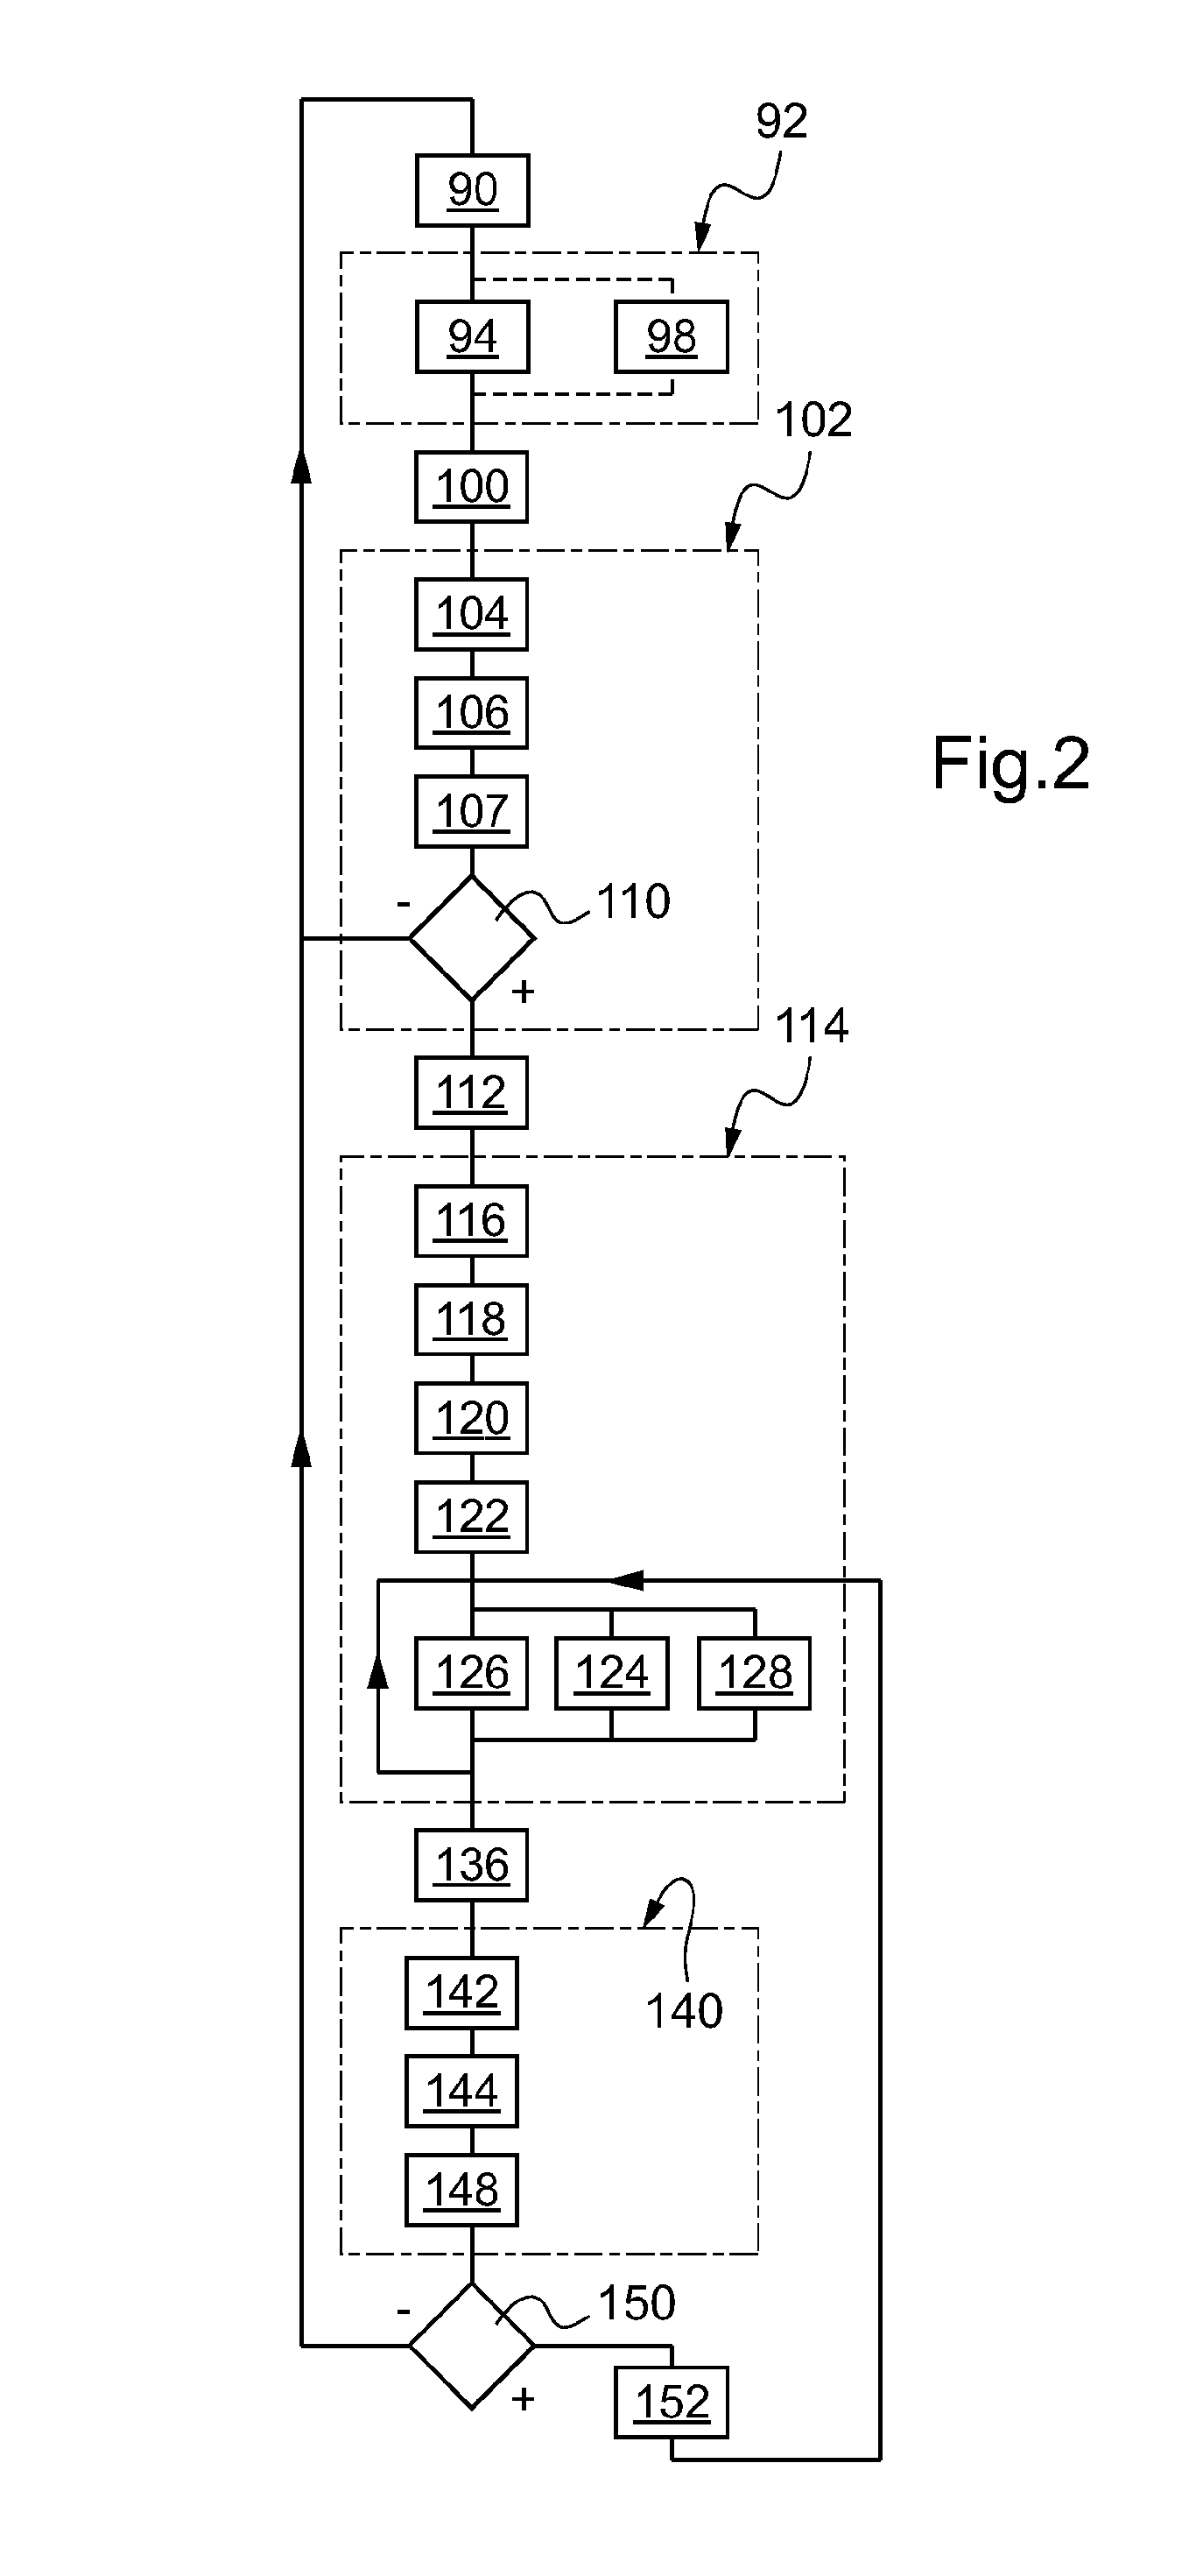 Machine and method for machining a part by micro-electrical discharge machining